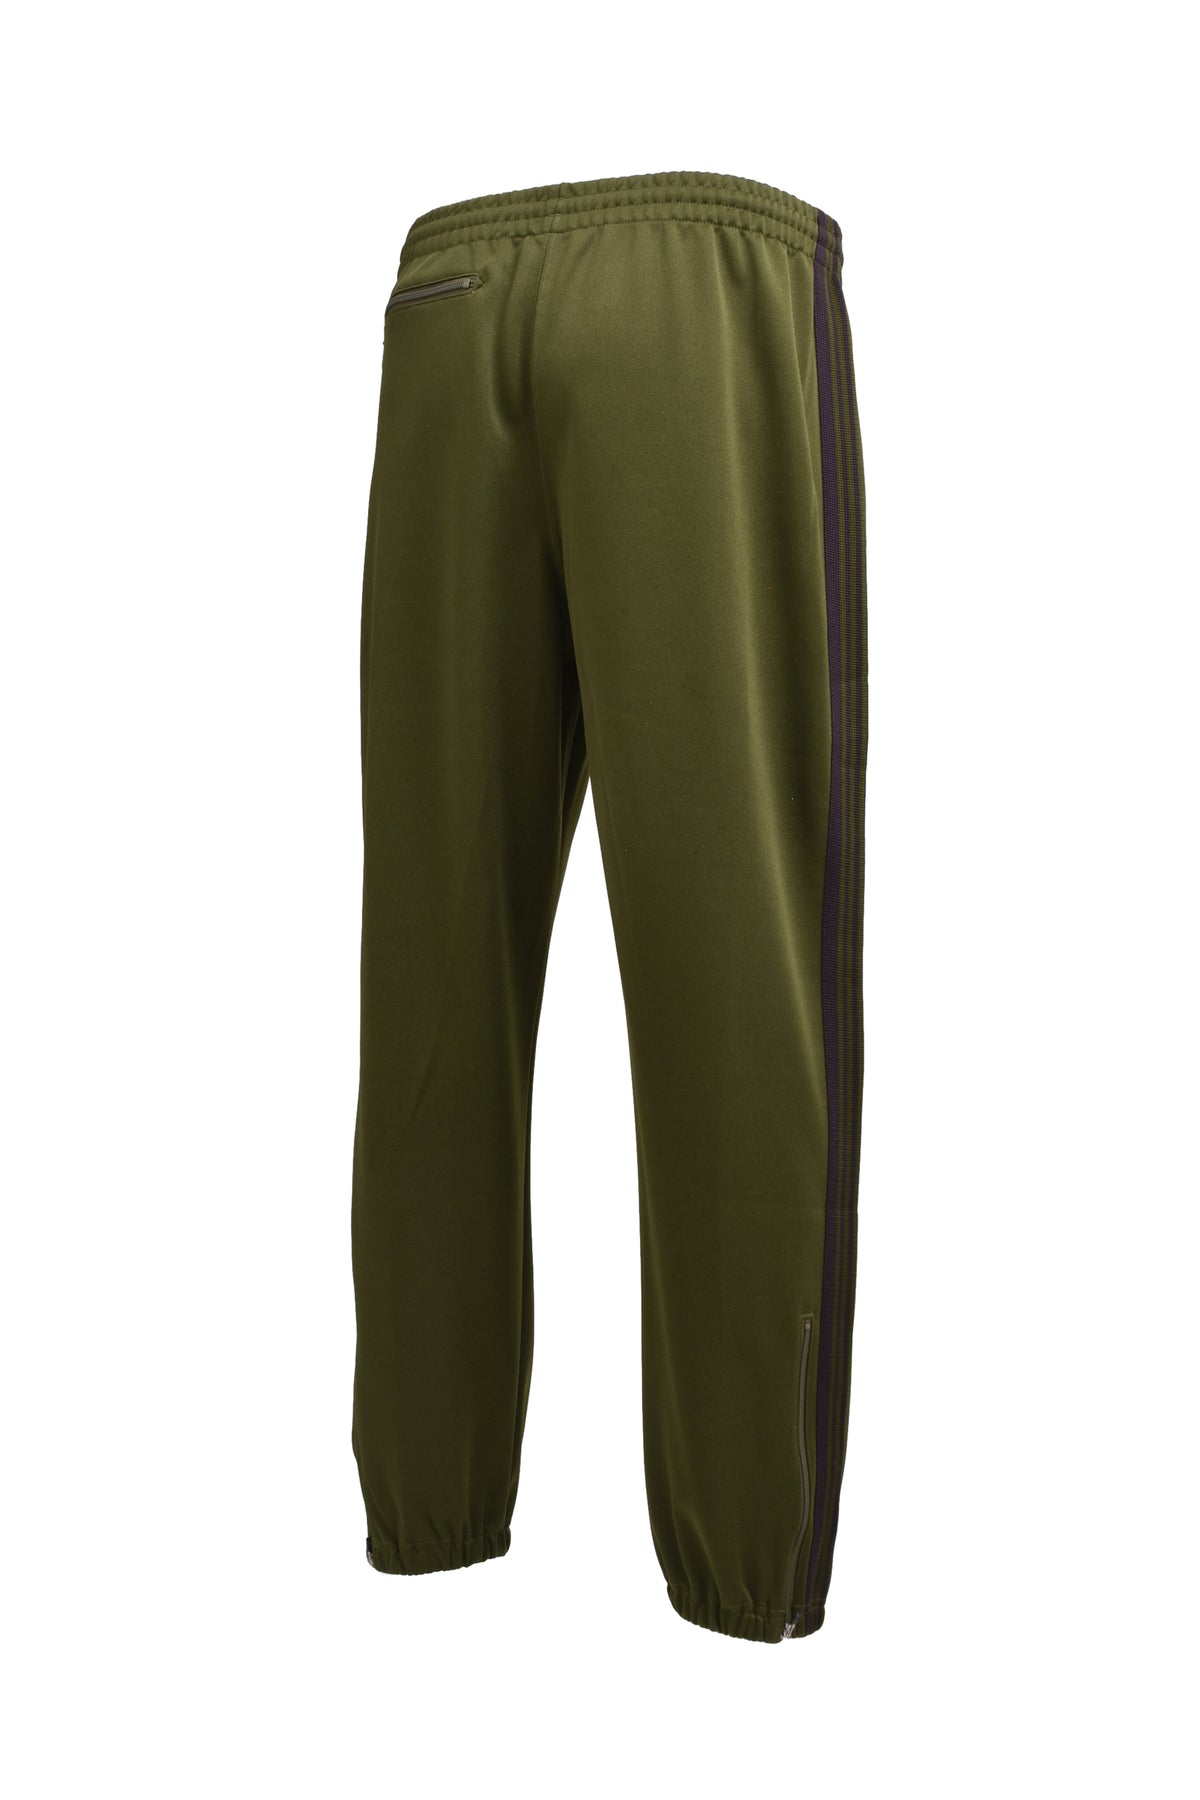 ZIPPED TRACK PANT - POLY SMOOTH / OLV